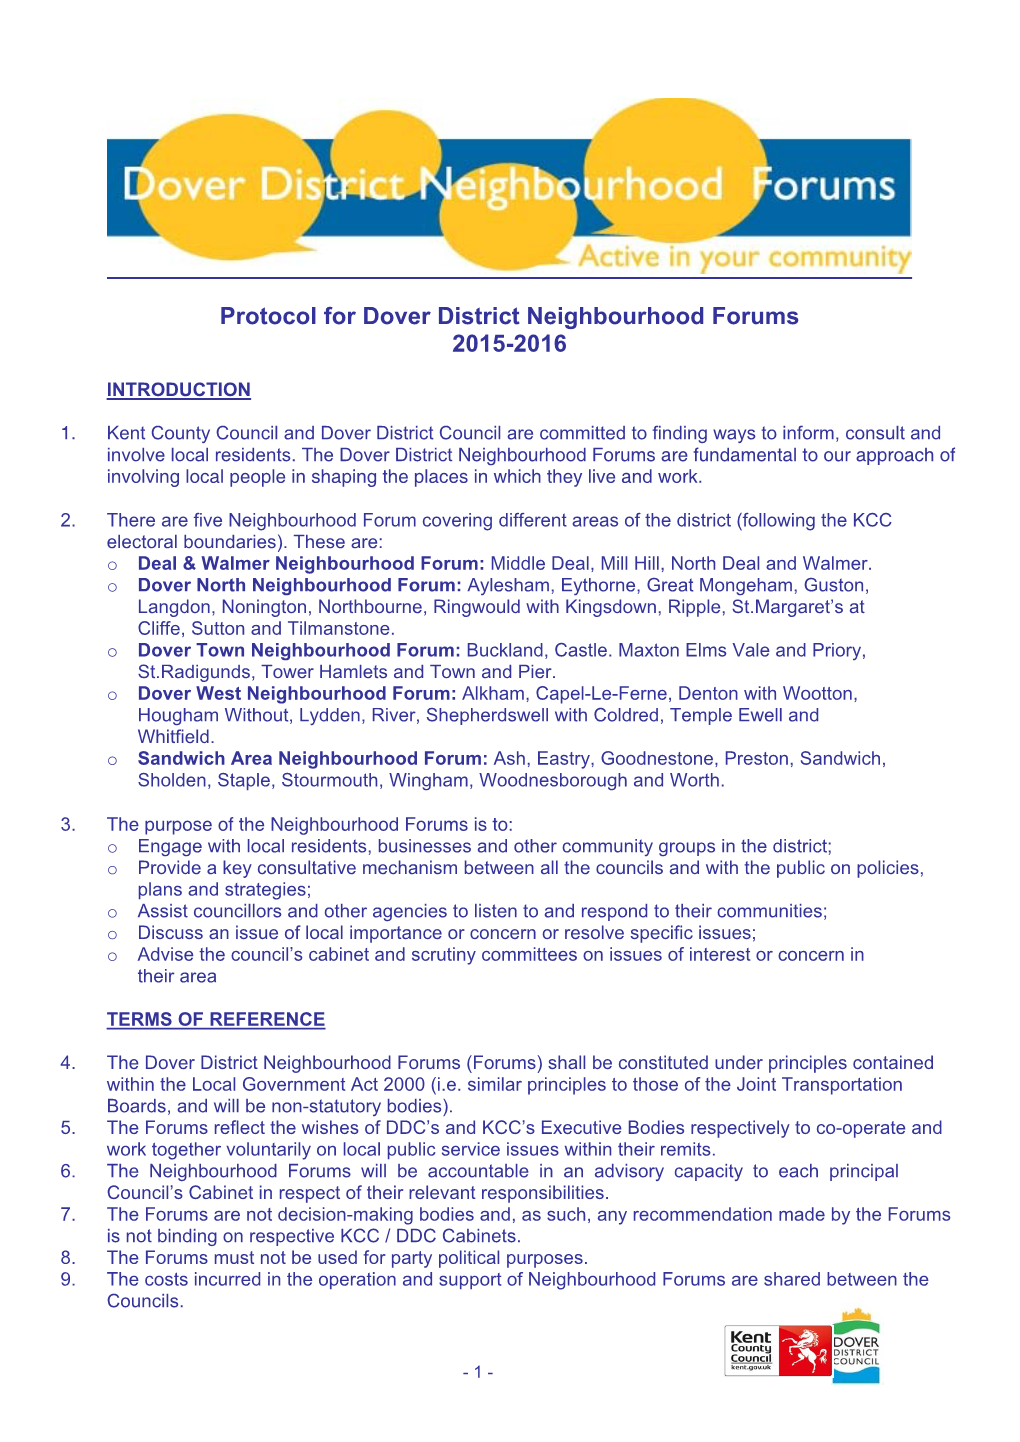 Protocol for Dover District Neighbourhood Forums 2015-2016